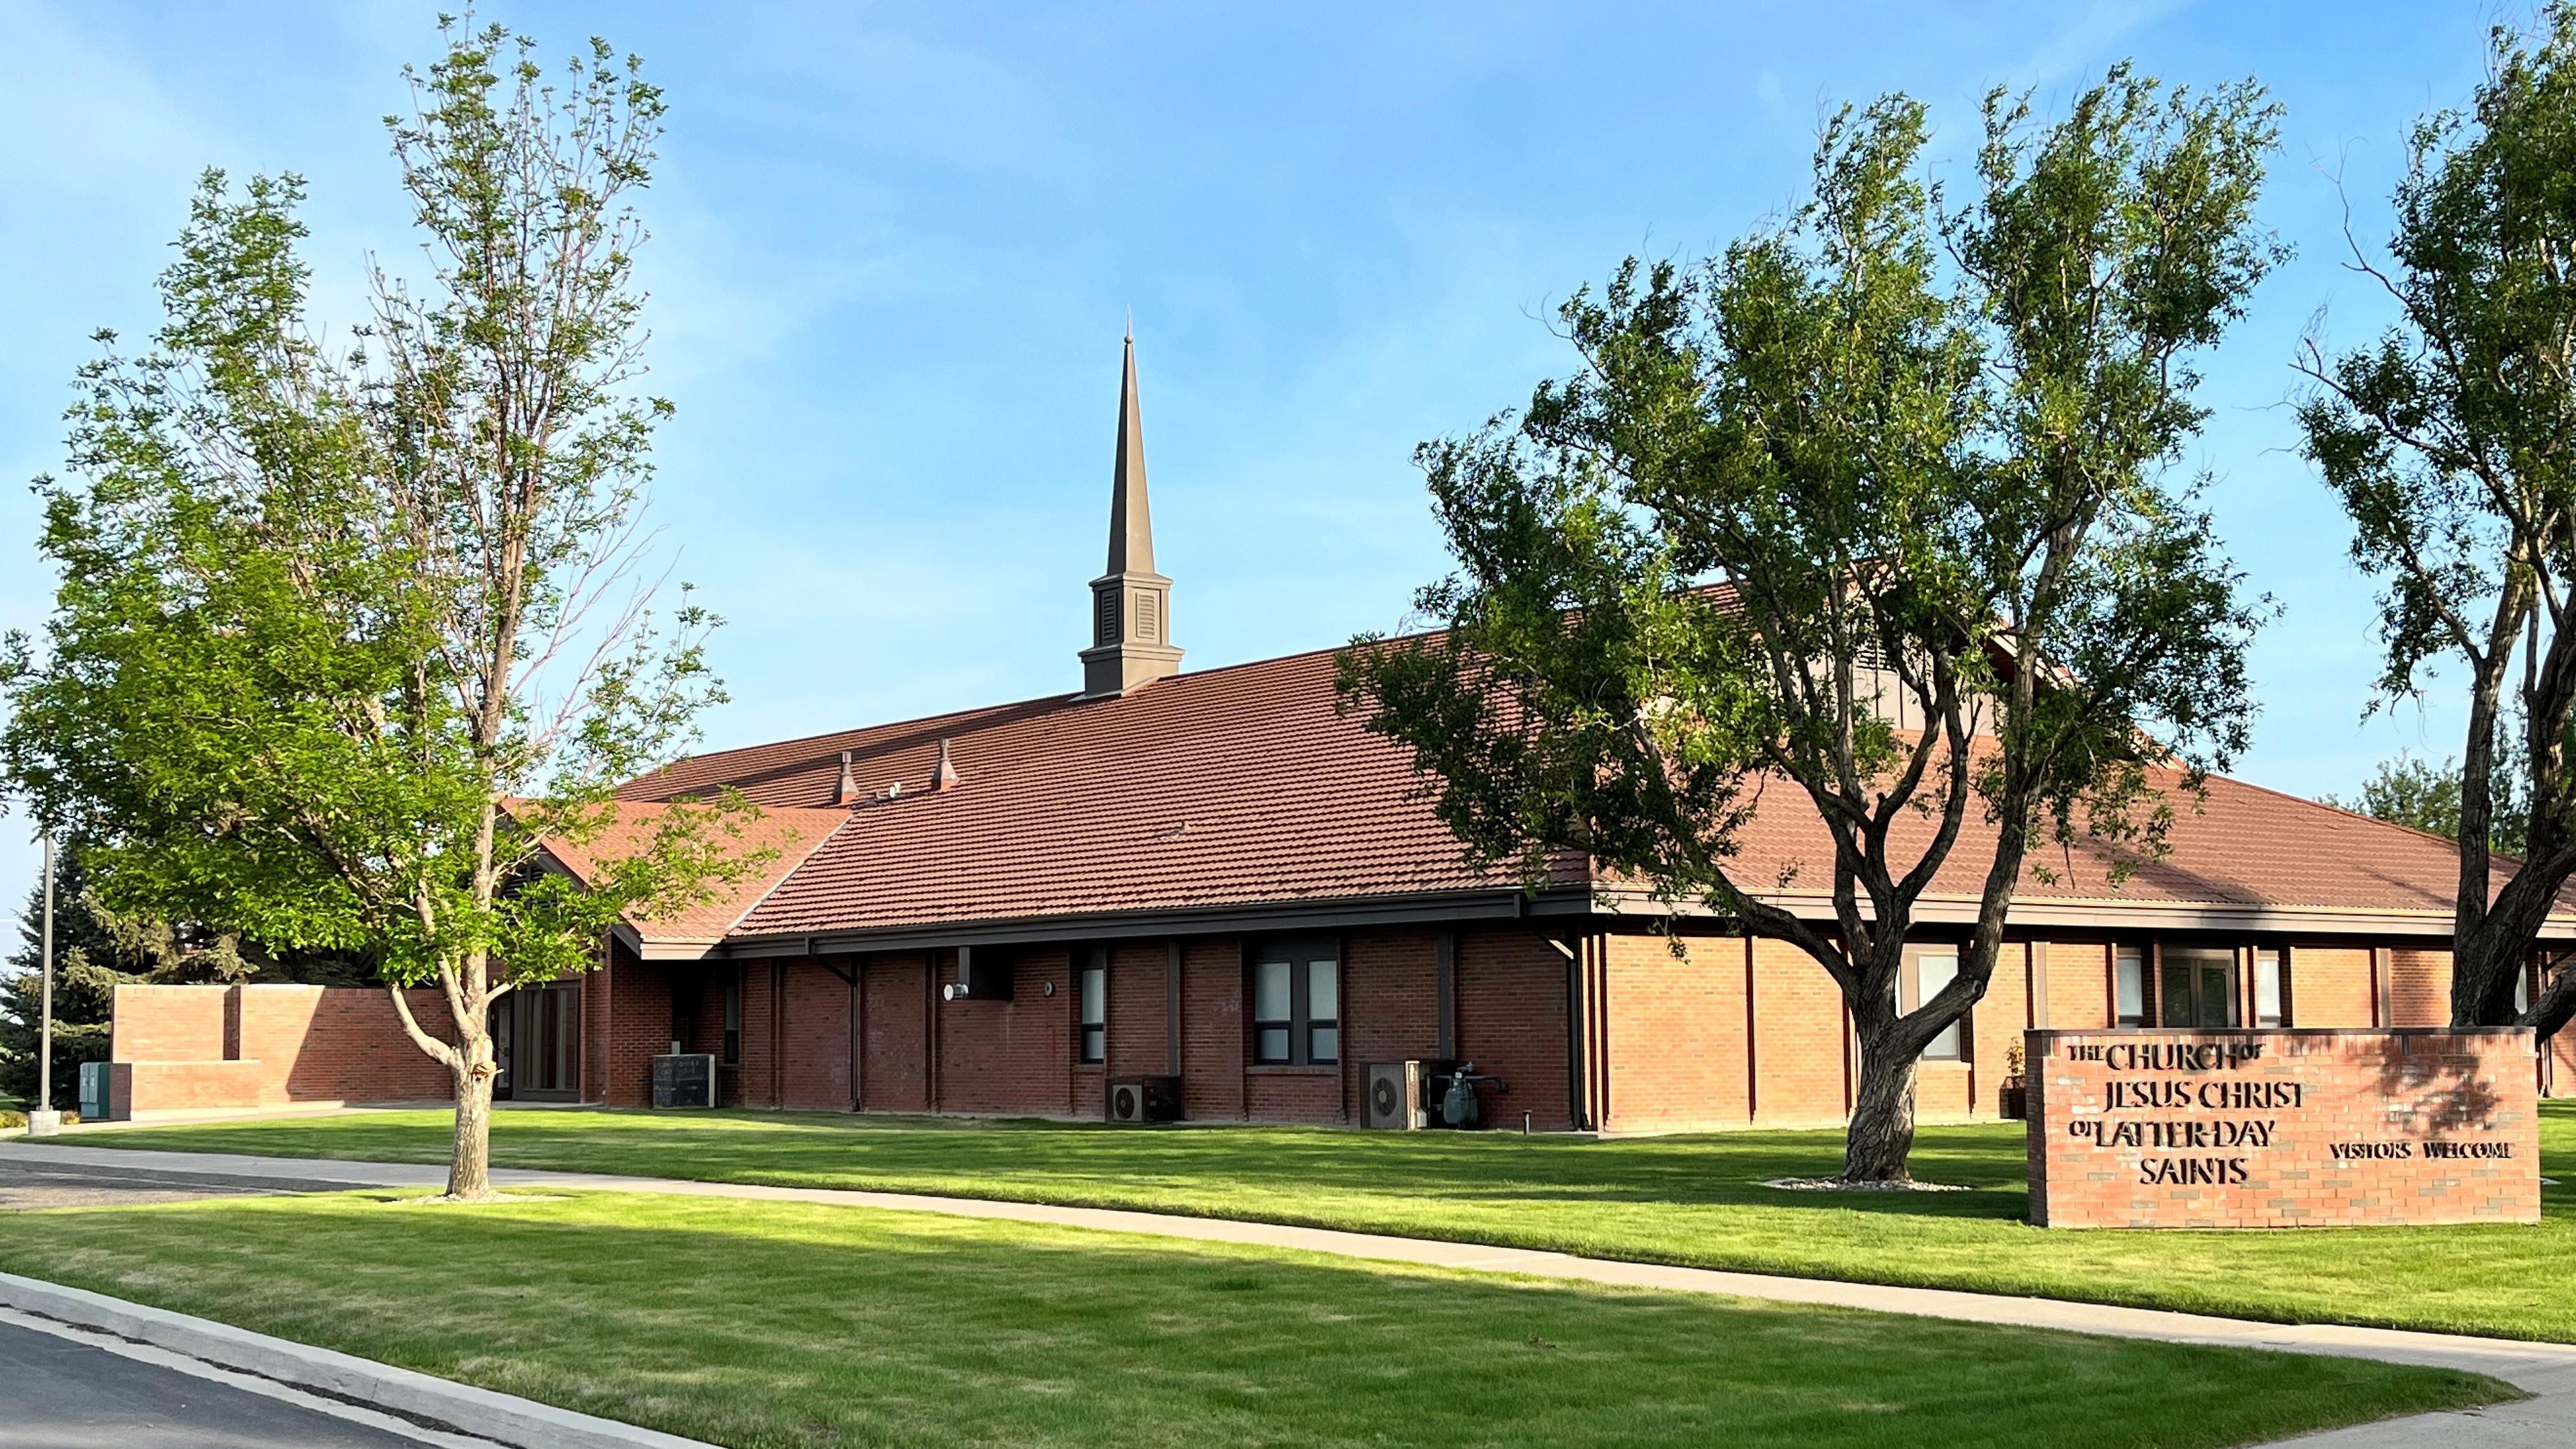 The Church of Jesus Christ of Latter-day Saints Picture Butte